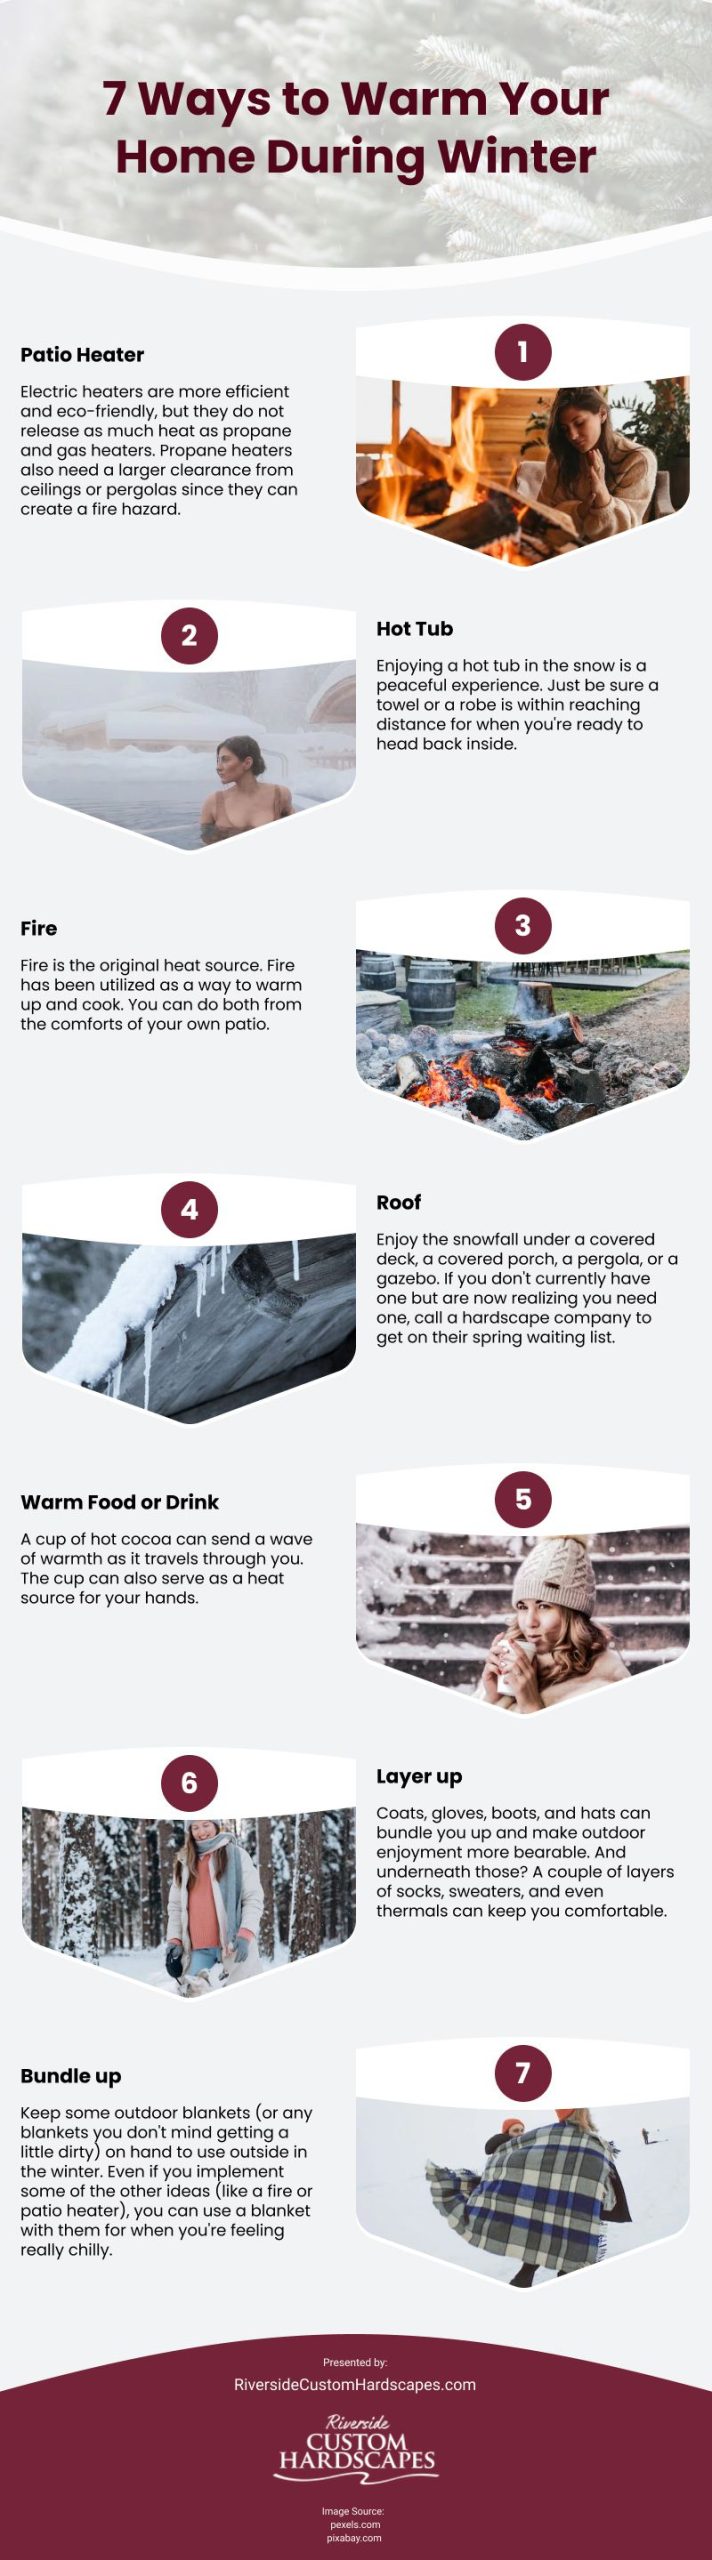 7 Ways to Warm Your Home During Winter Infographic